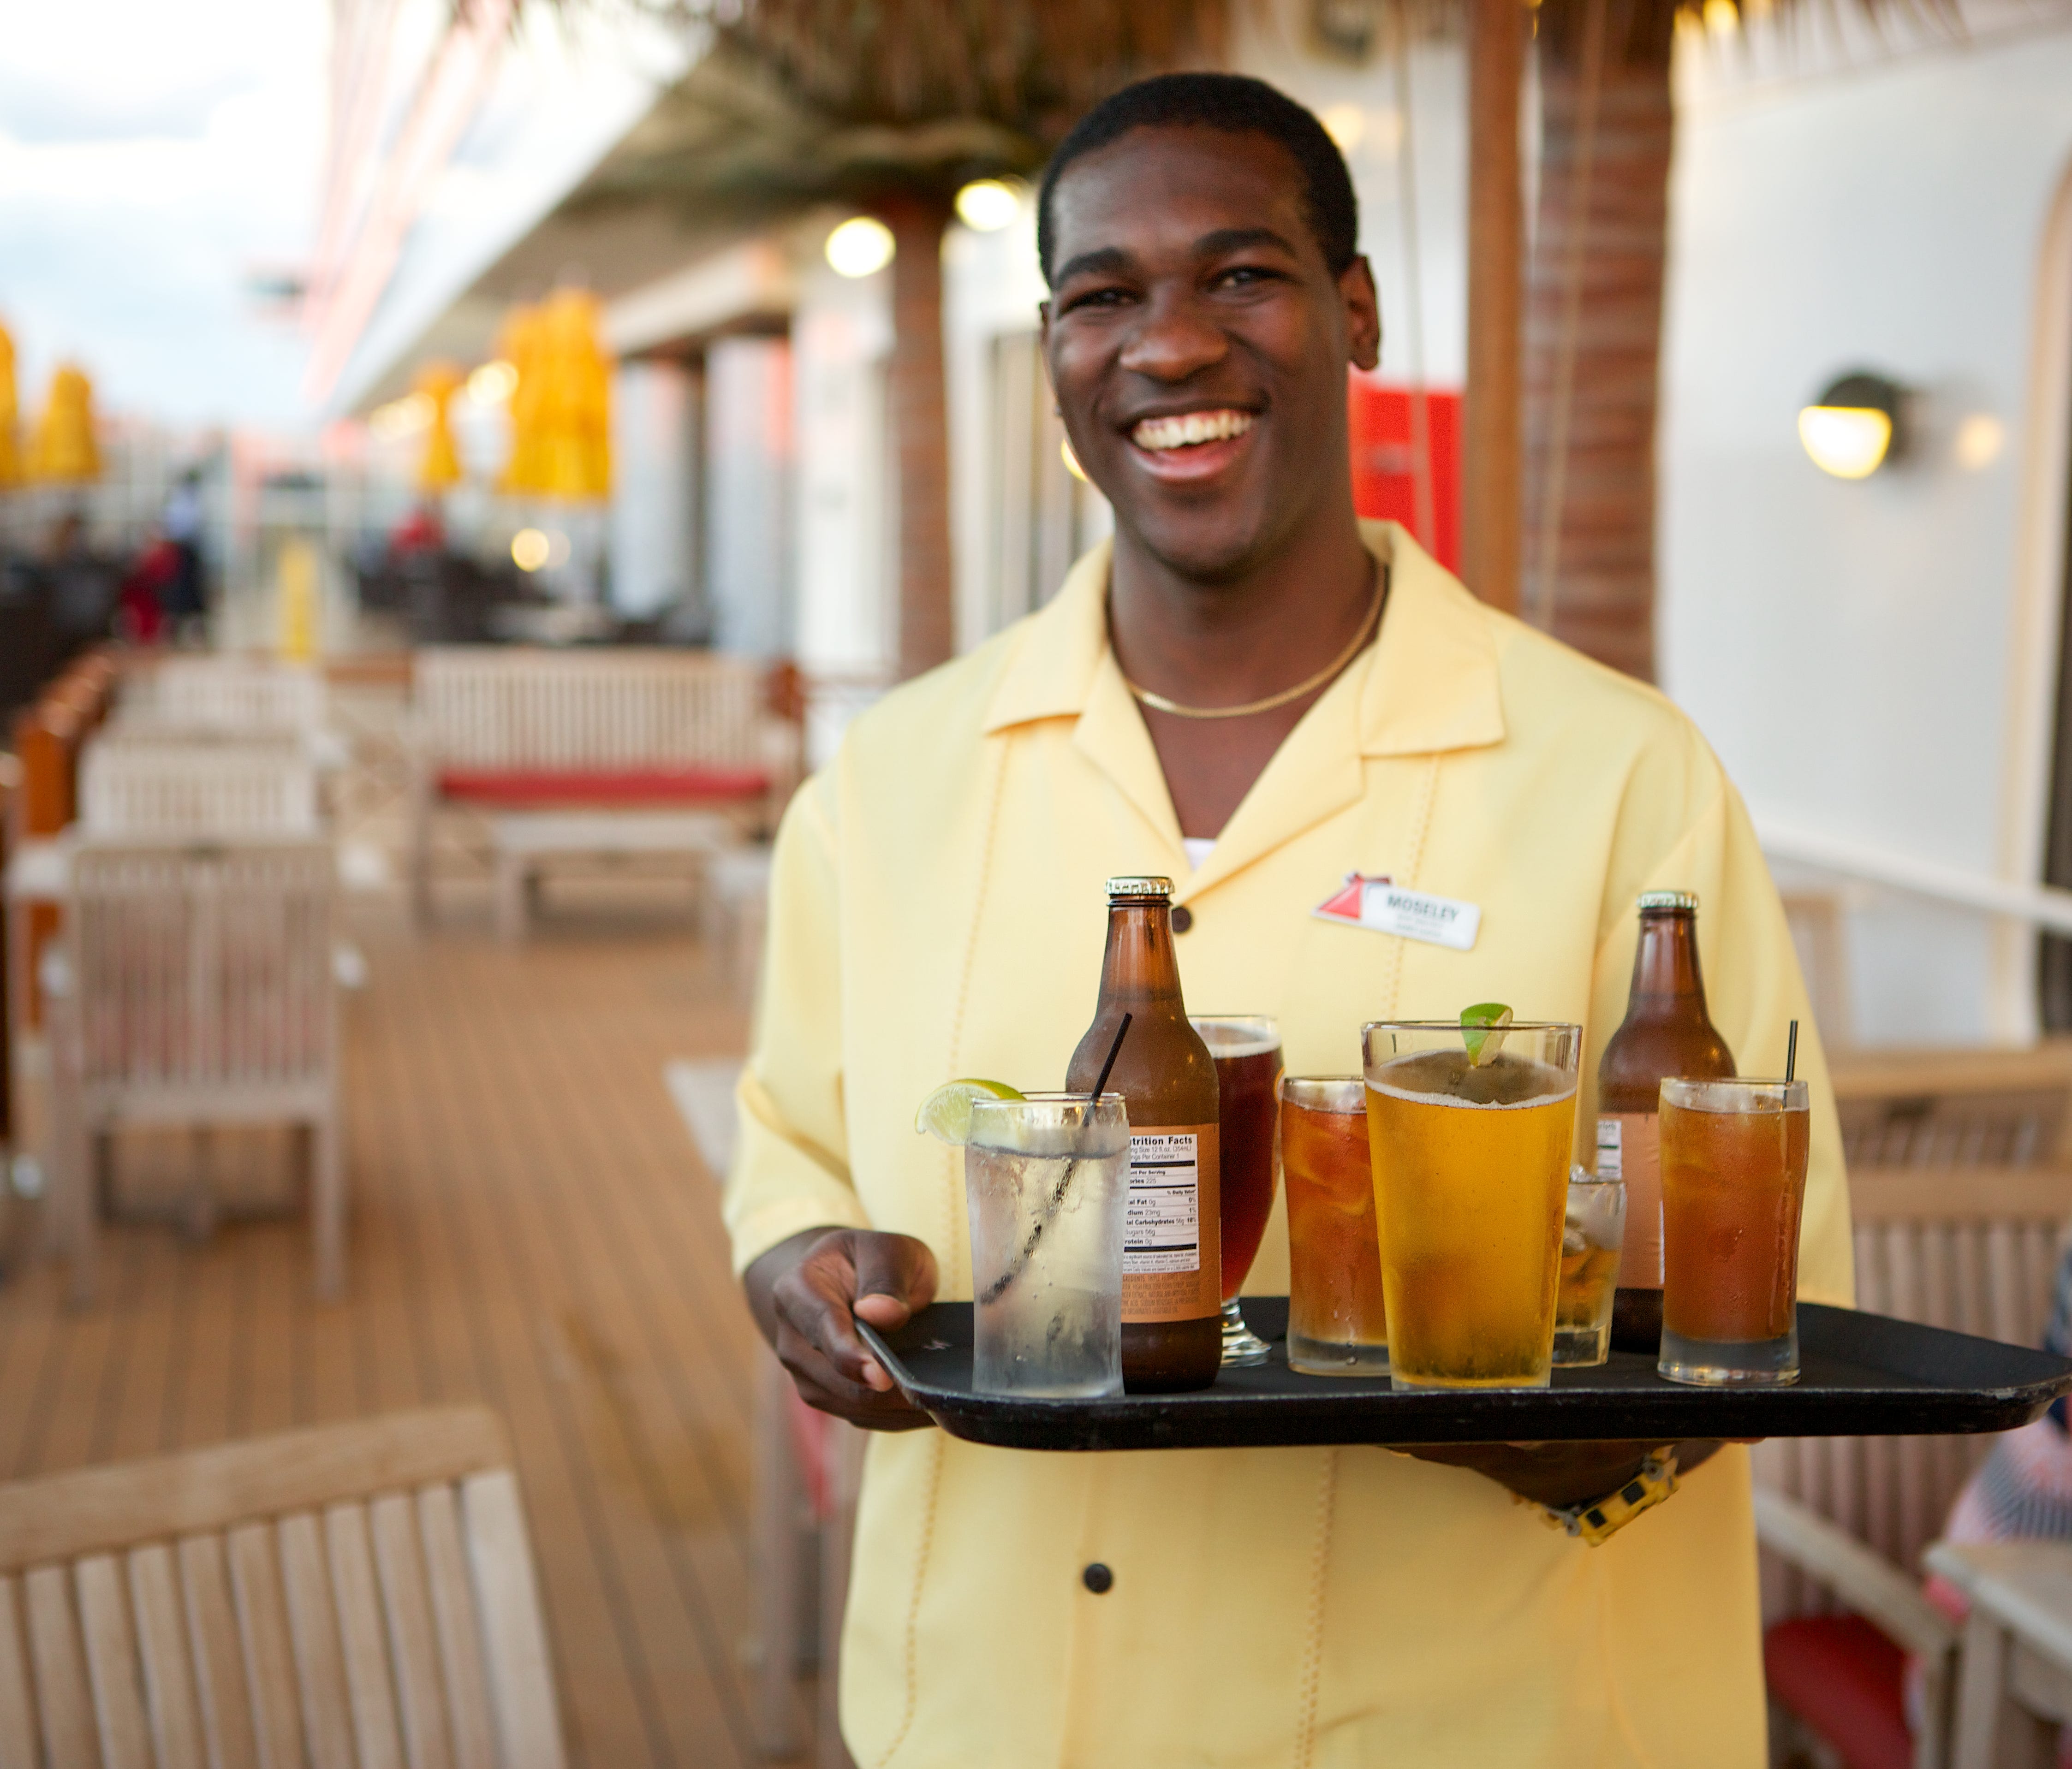 Carnival Cruise Line is hiking the amount of gratuity for staff it automatically adds to passenger bills.